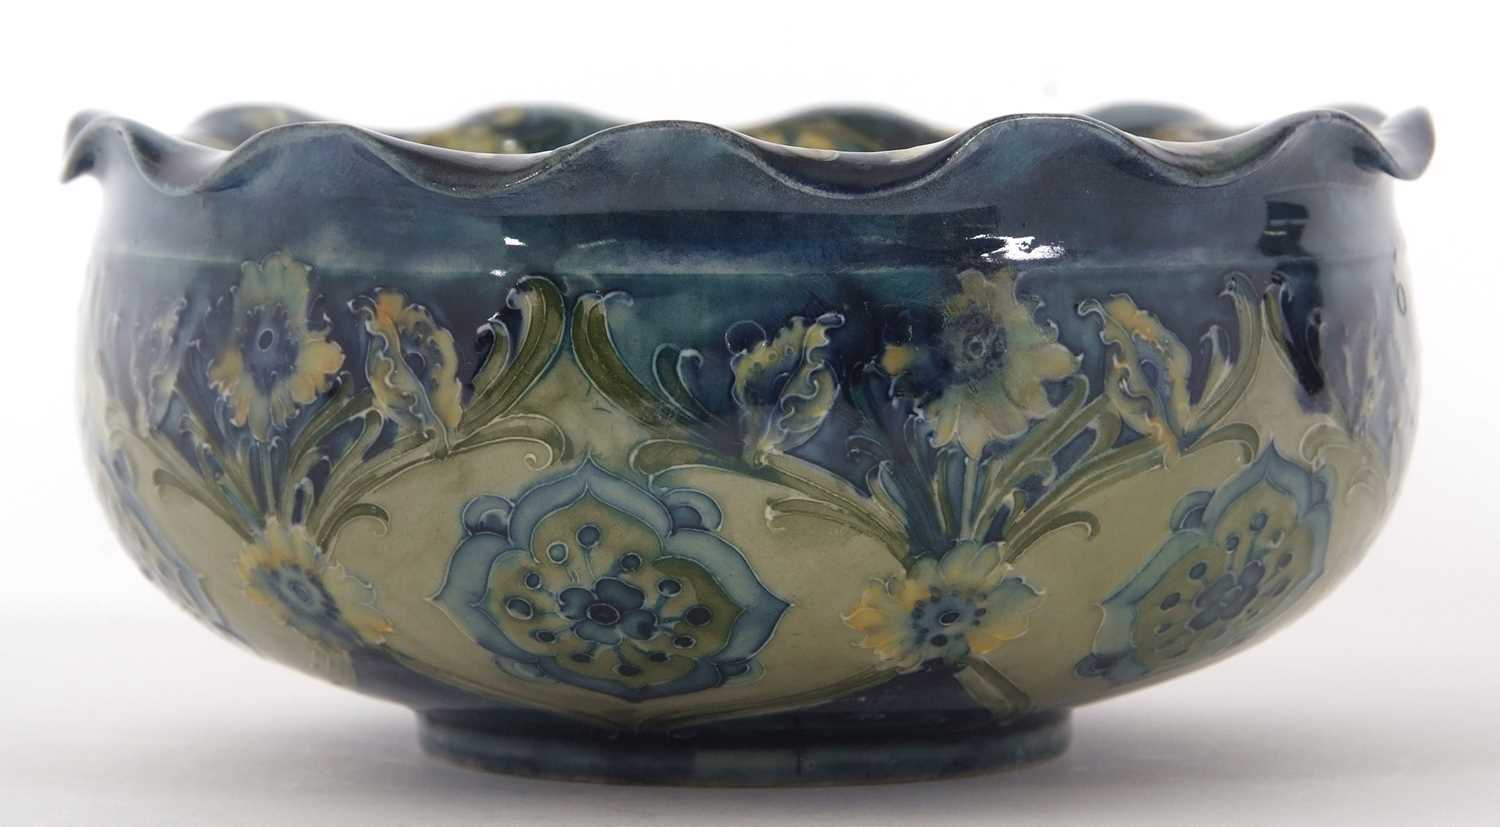 A Moorcroft Florian ware bowl made for Liberty with a Art Nouveau stylised floral design in green - Image 4 of 11